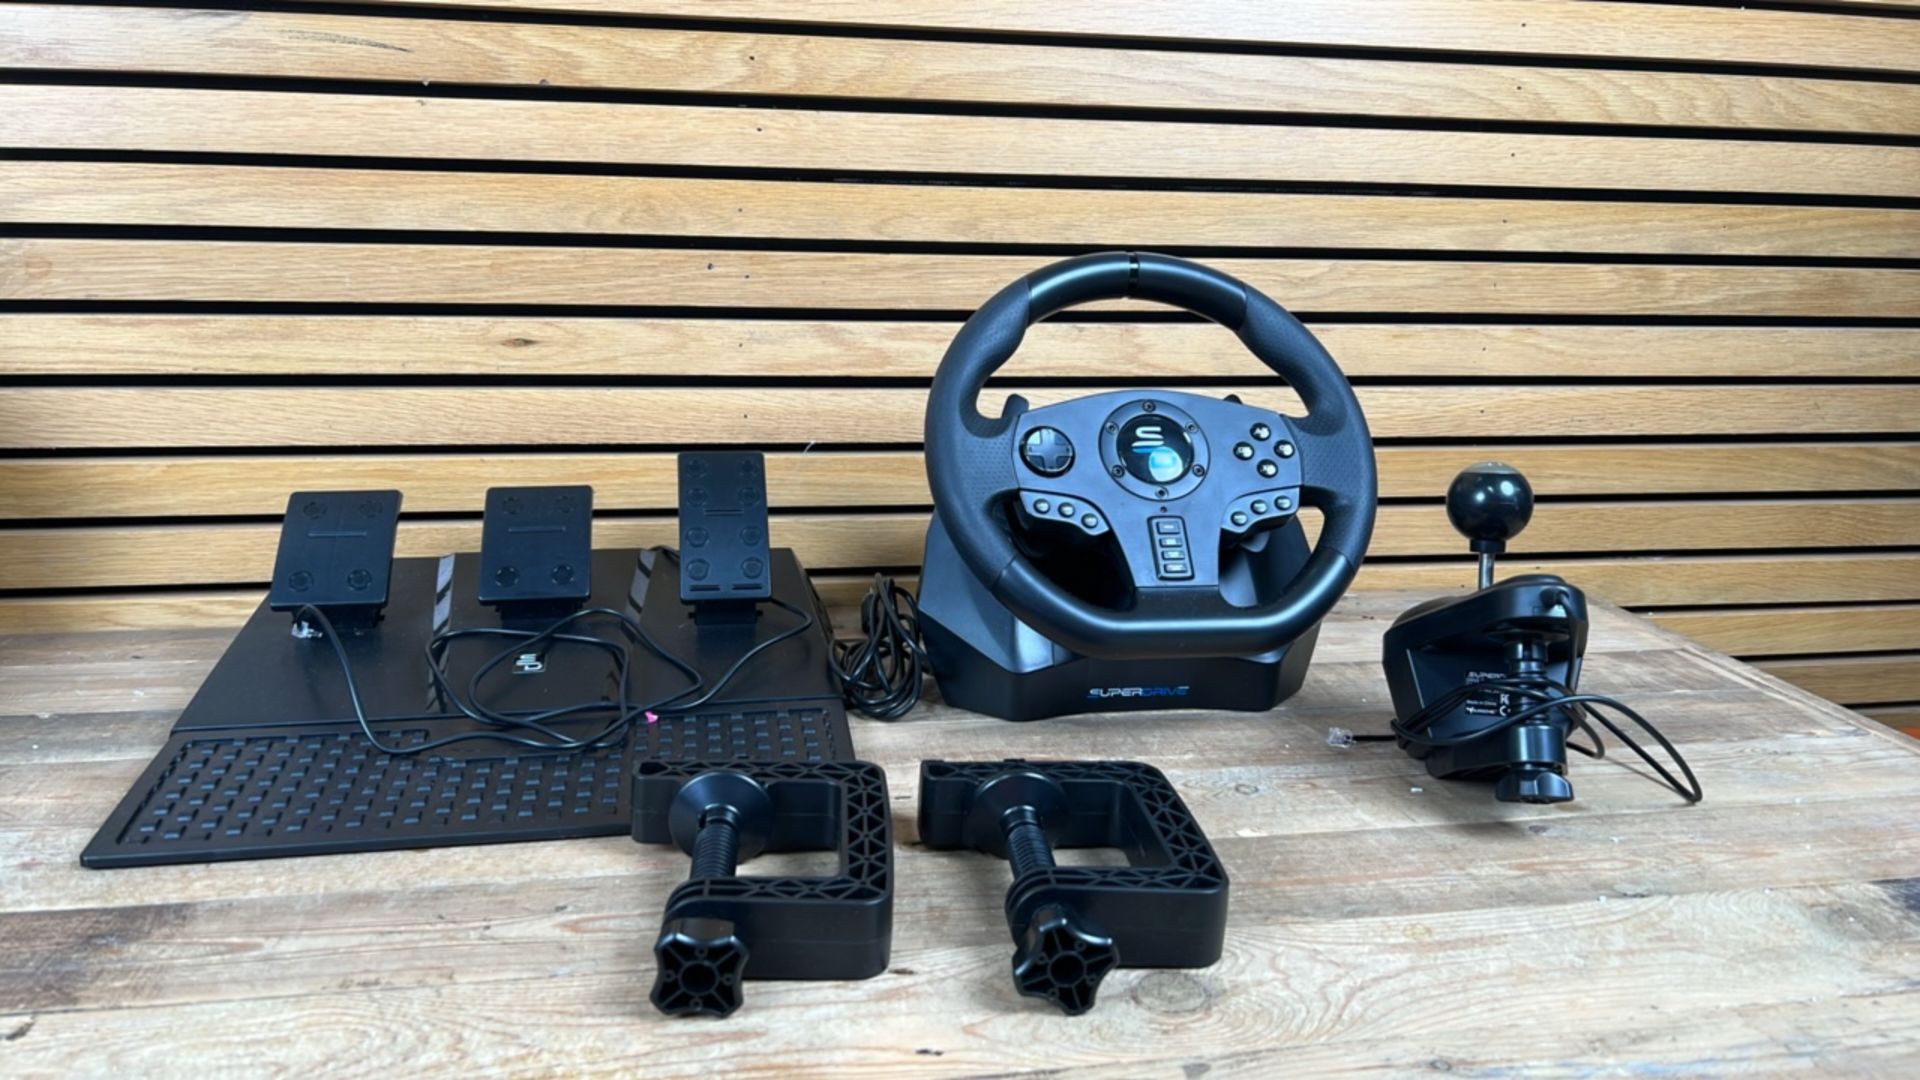 Subsonic GS 850X Universal Gaming Steering Wheel With Vibration, Pedals & Gears